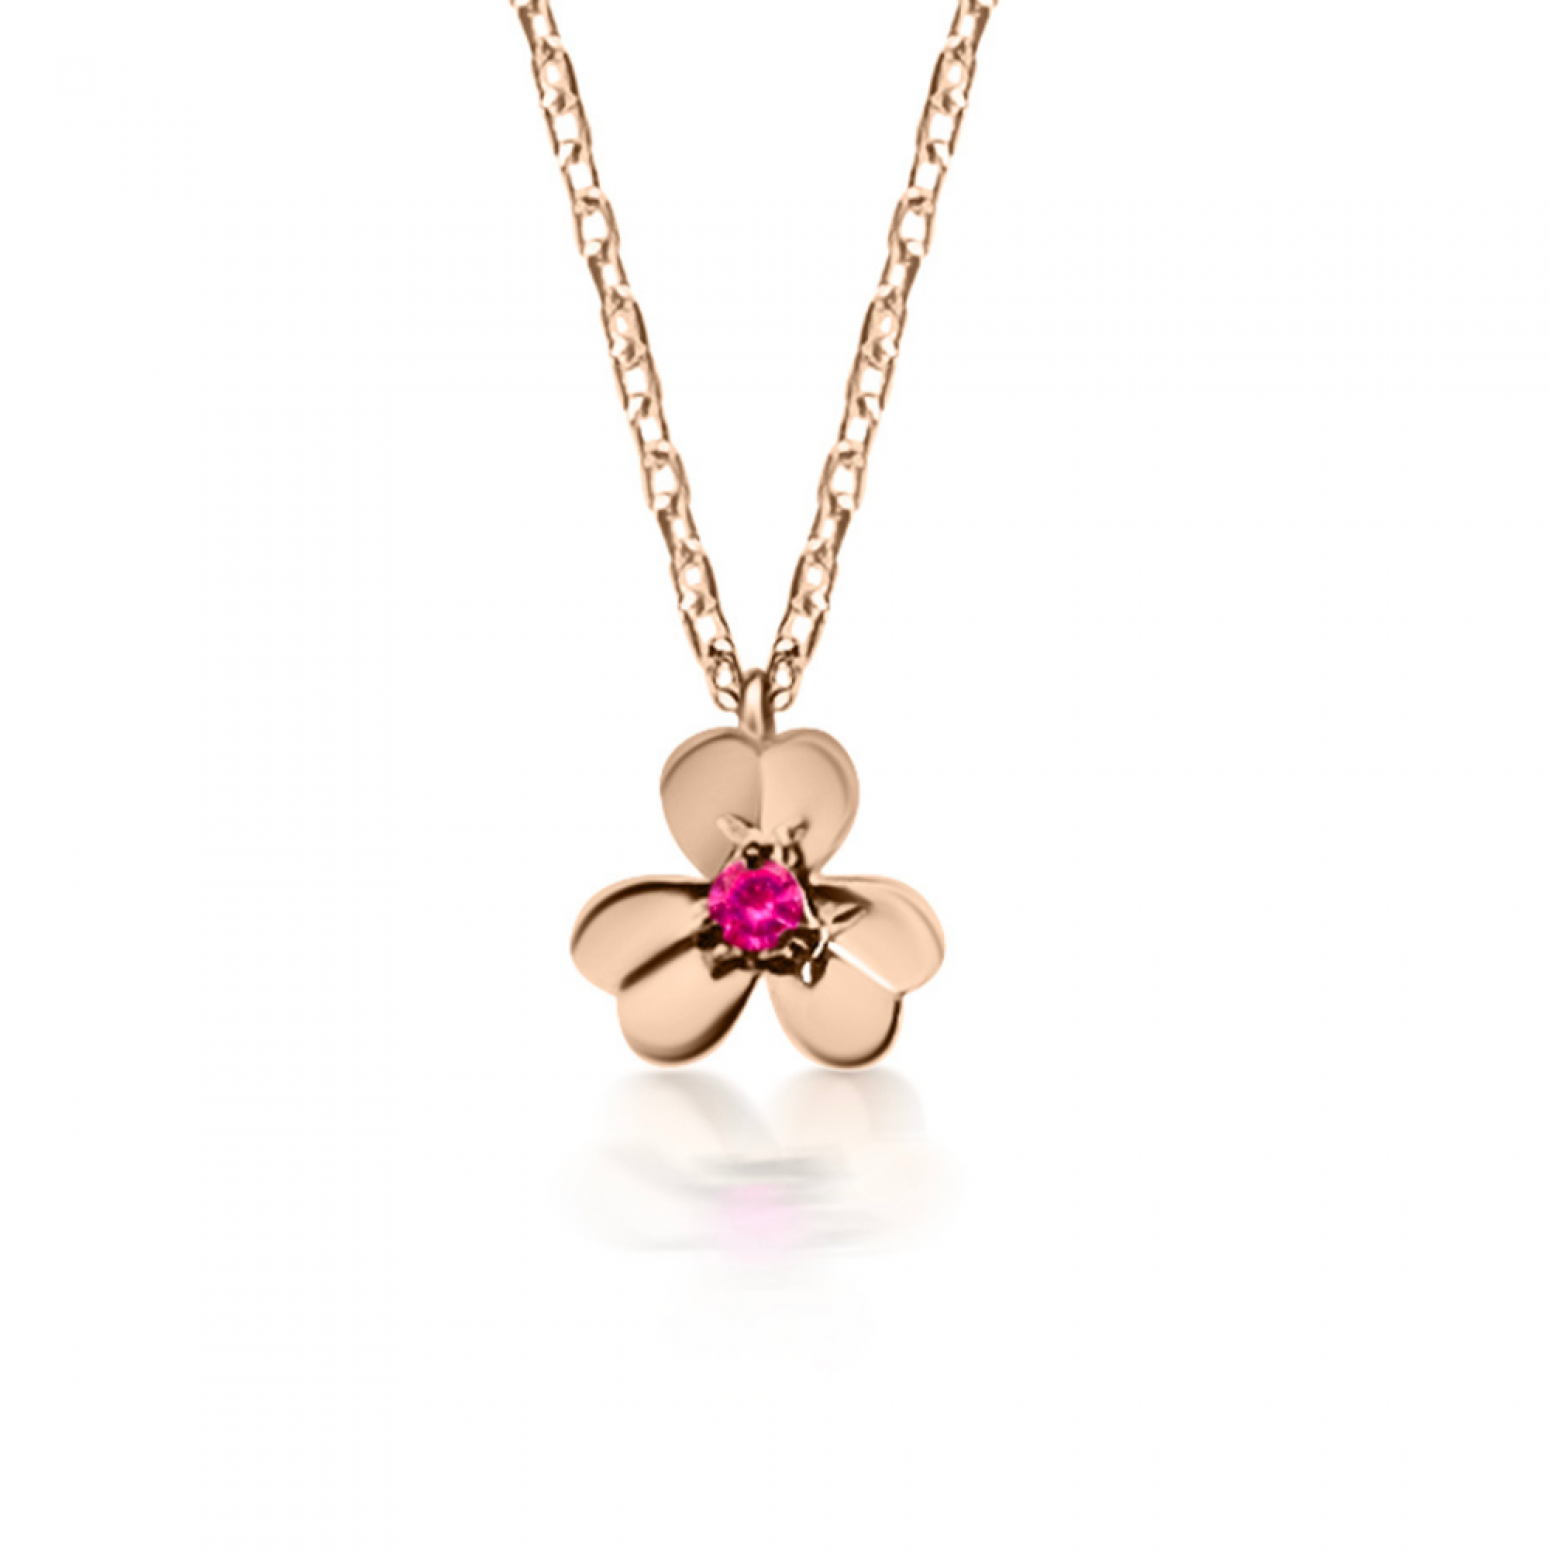 Clover necklace, Κ9 pink gold with ruby 0.08ct, ko5891 NECKLACES Κοσμηματα - chrilia.gr